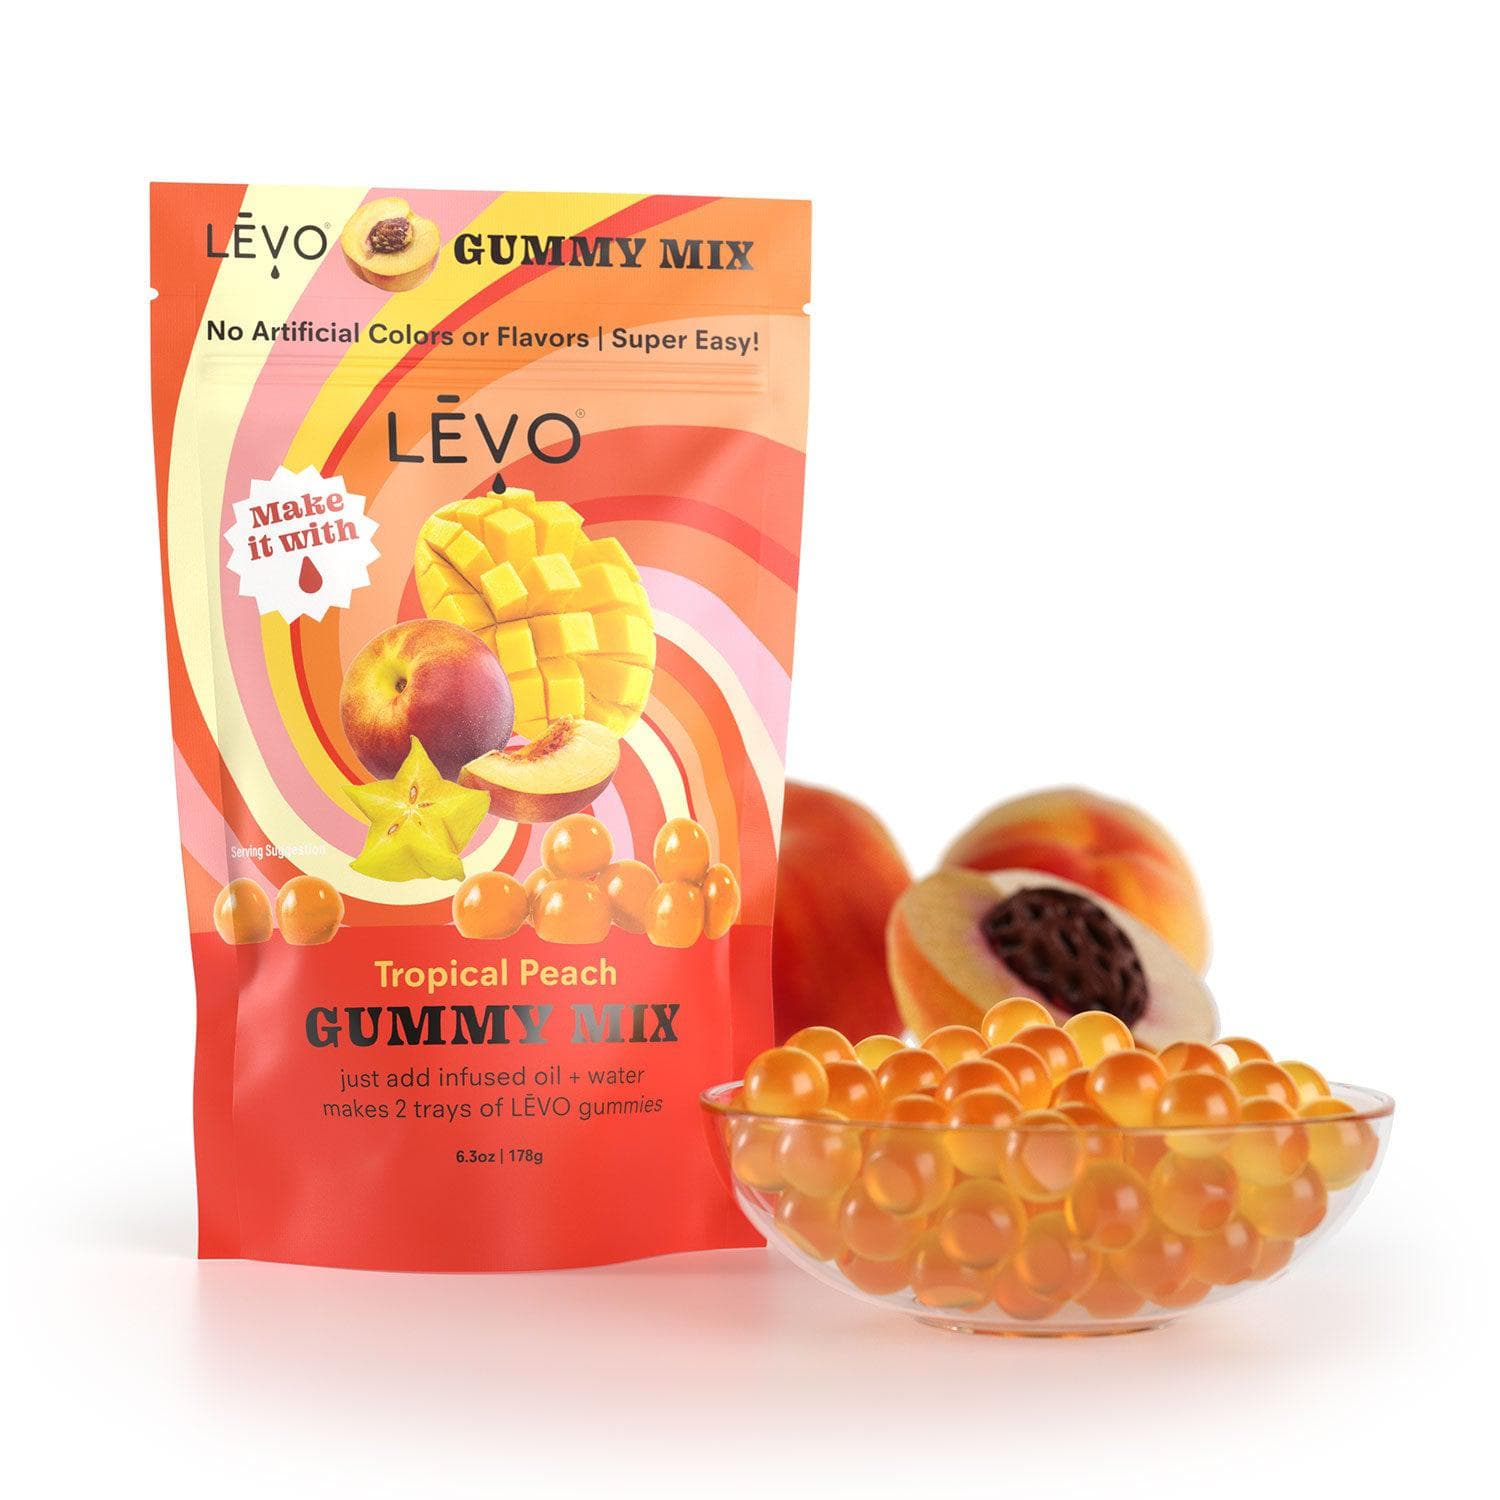 LEVO Gummy mix in tropical peach. Tropical Peach Gummy Mix - Experience a tropical escape with the juicy and sweet flavor of peaches in this LĒVO gummy mix.